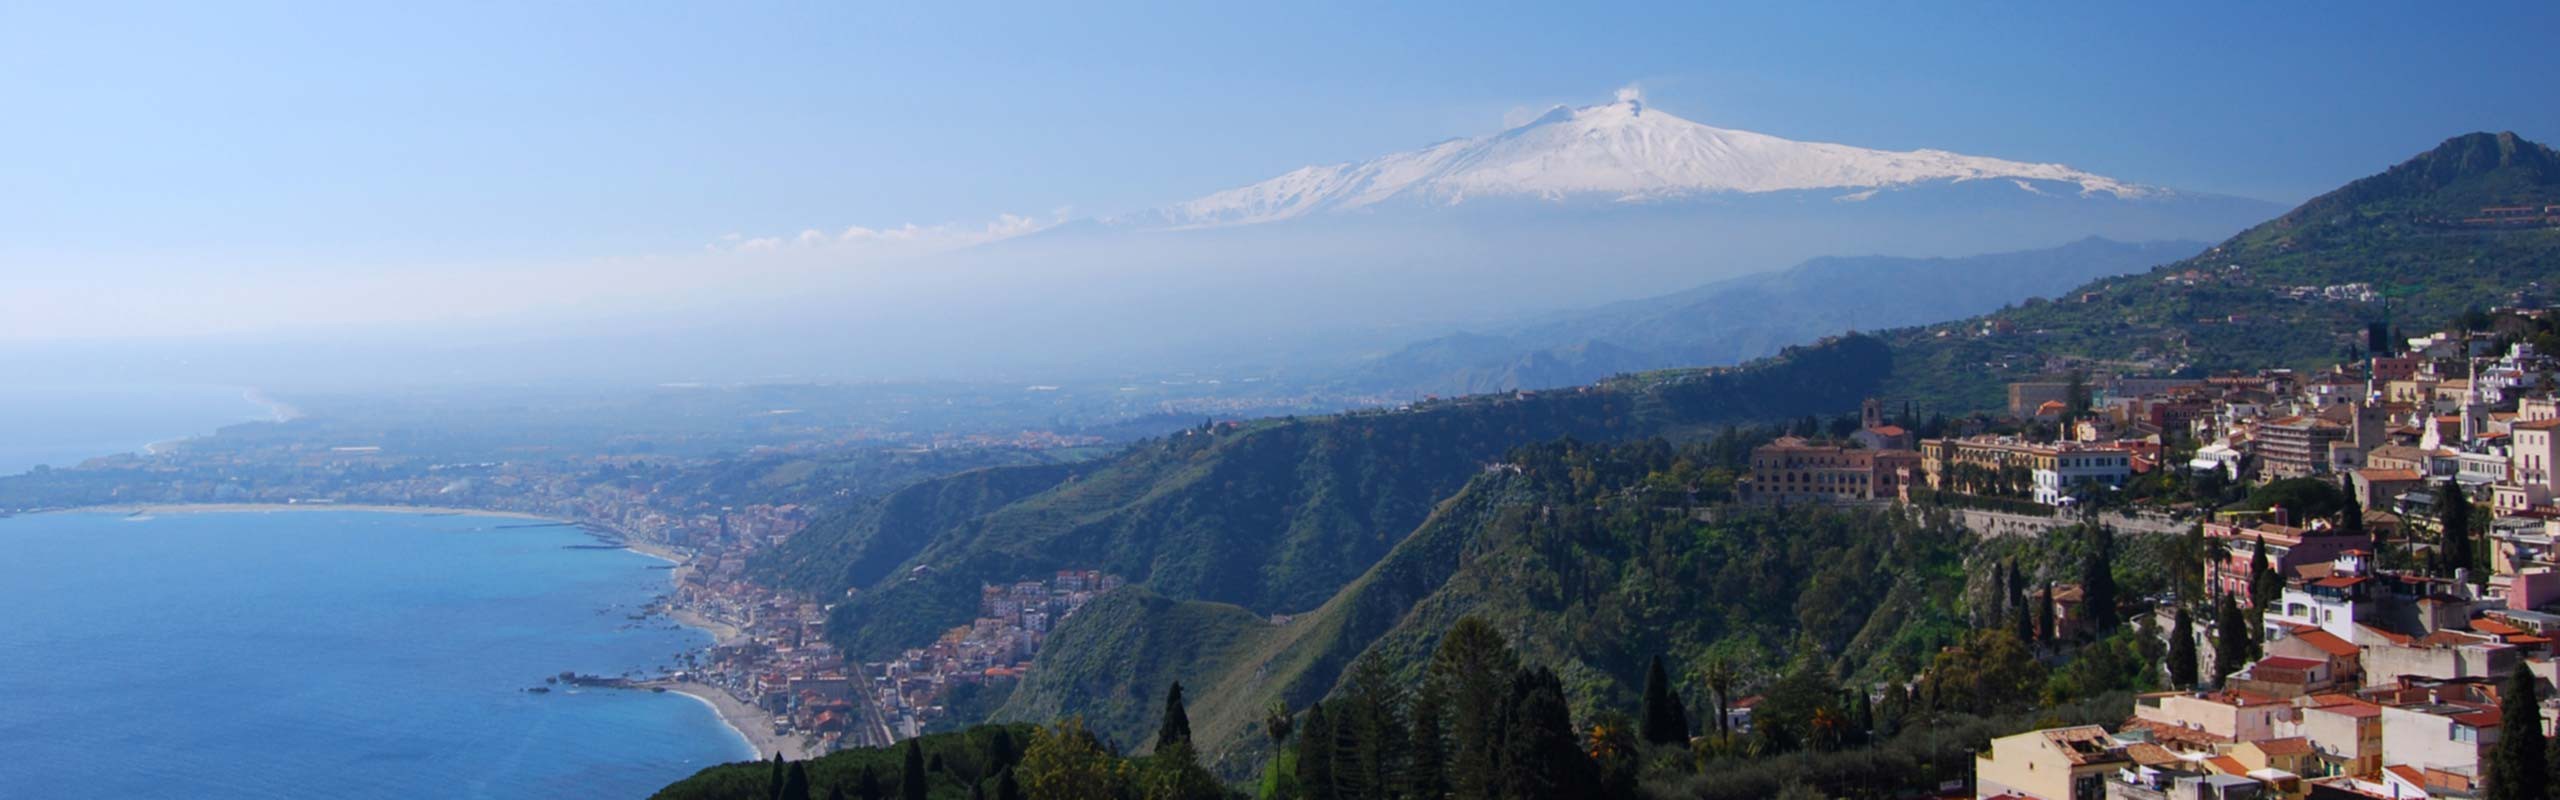 Mt. Etna - Guided Tour in Mount Etna – Select Italy